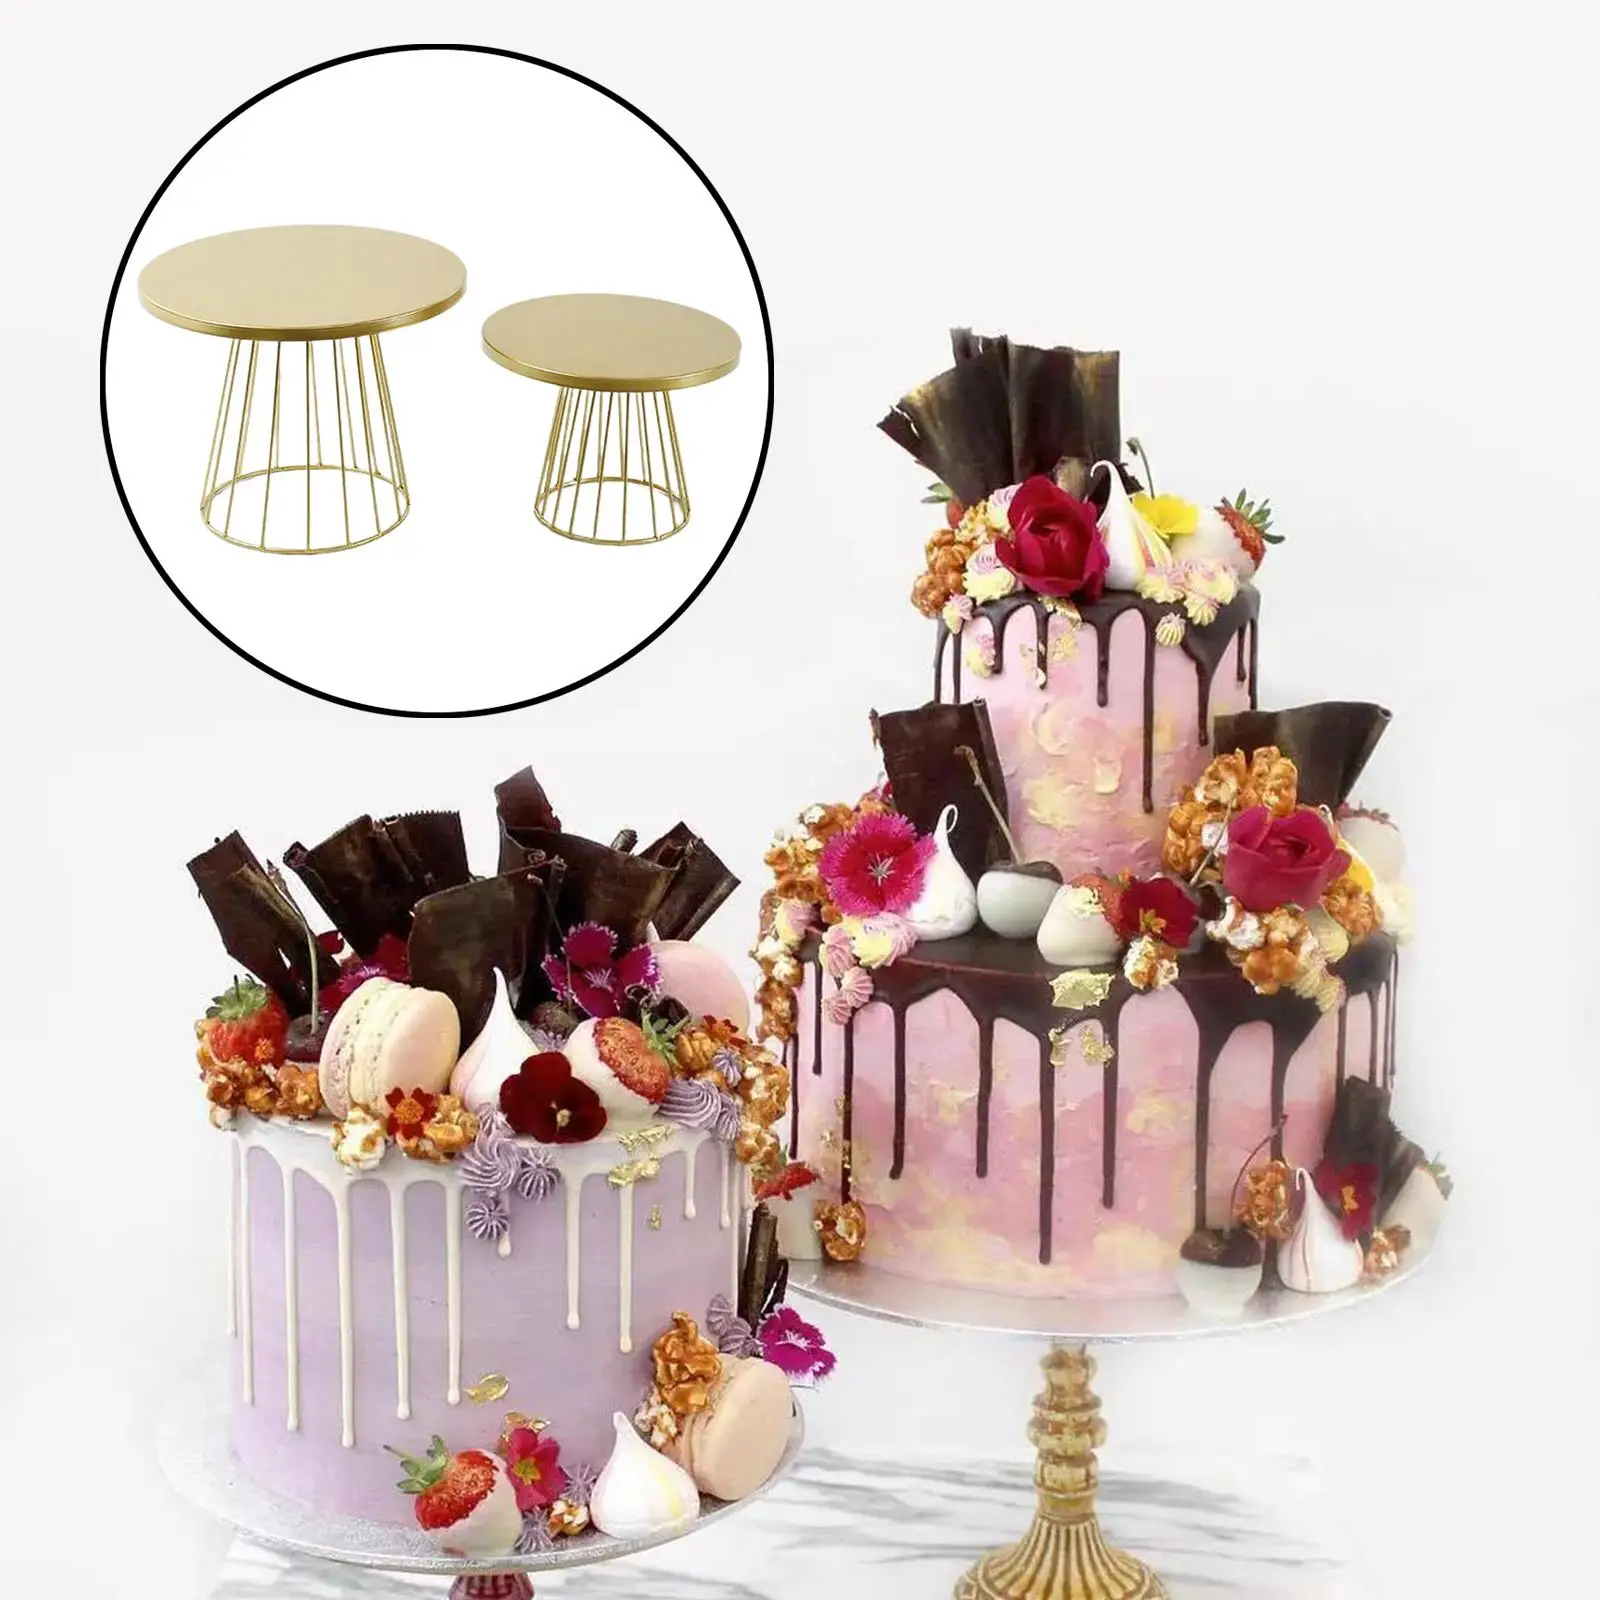 Gold Round Shaped Cake Stand Dessert Display Holder Rack Party Cupcake Plate